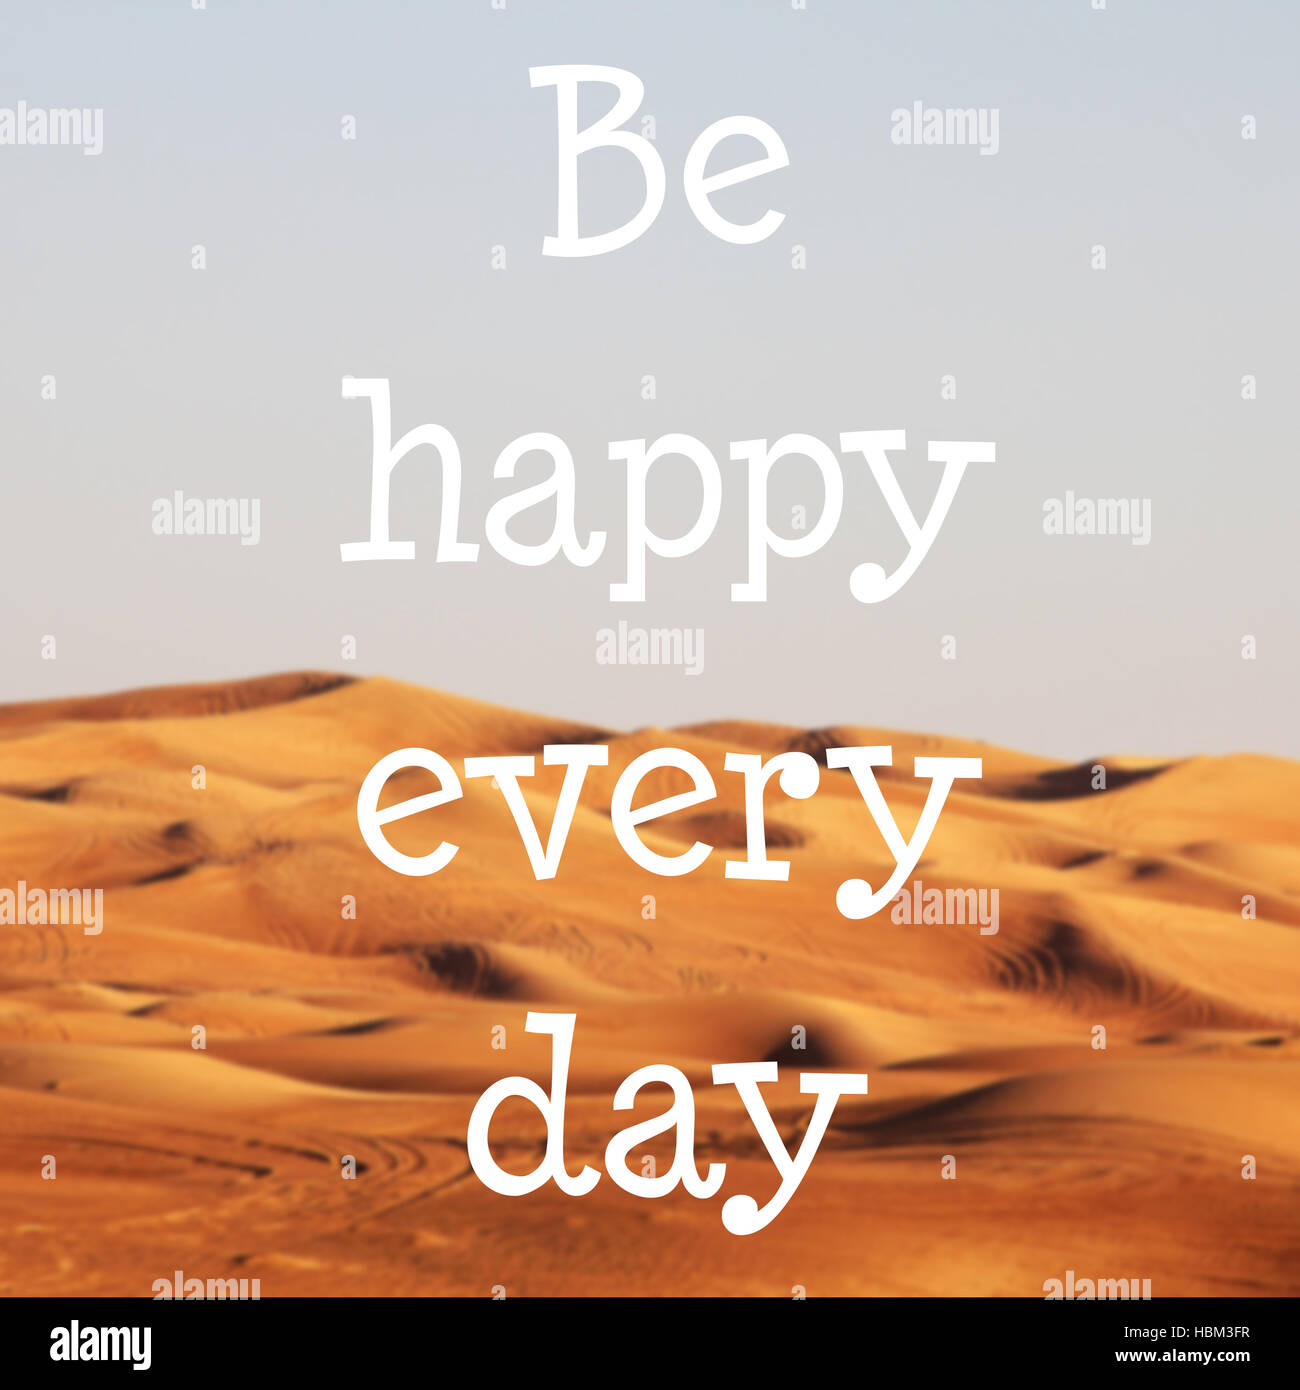 Blured desert with text: Be happy every day Stock Photo